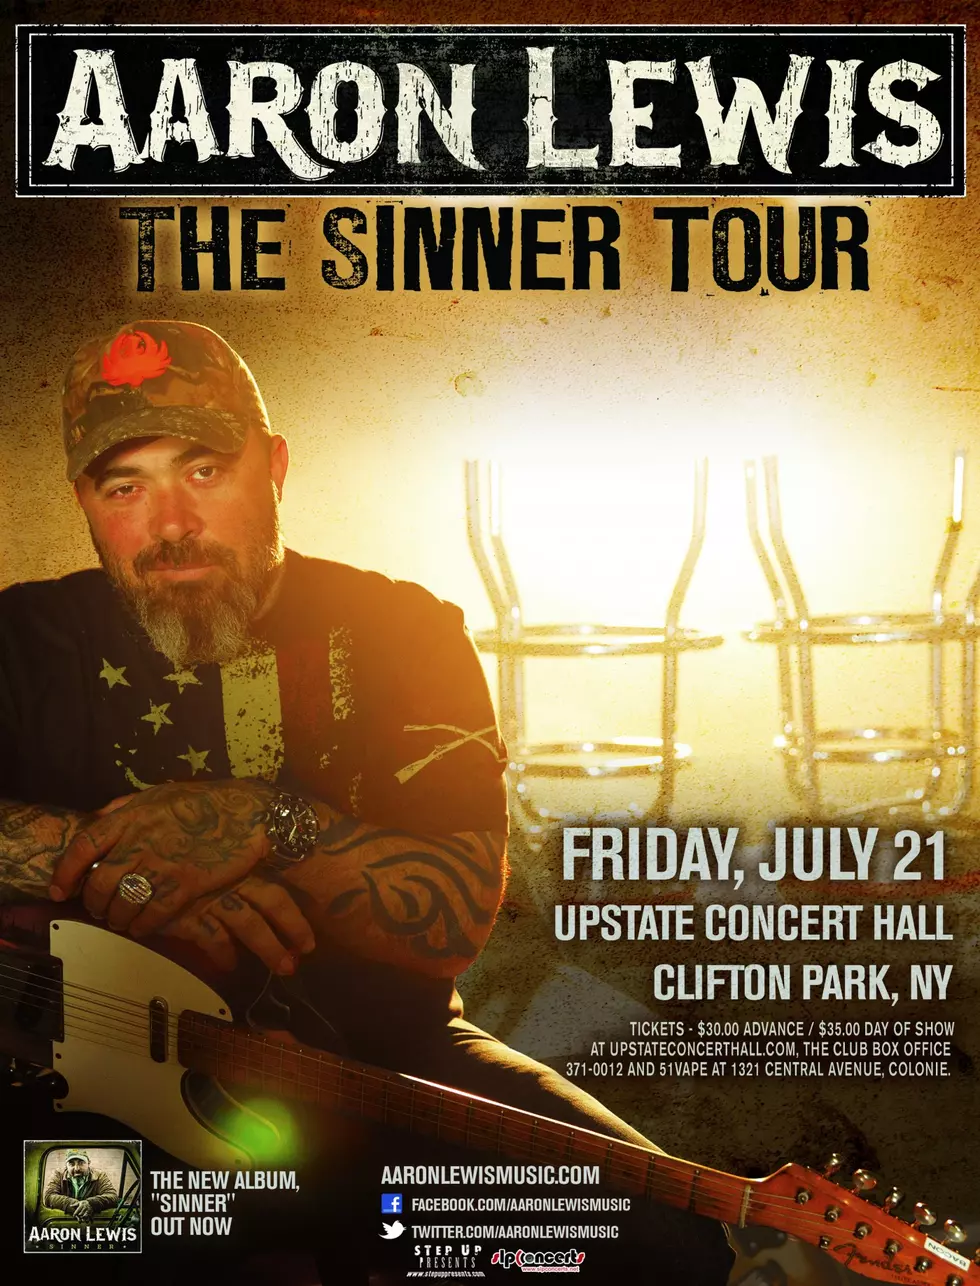 Score Free Lunch and Tickets to See Aaron Lewis This Week on the Q